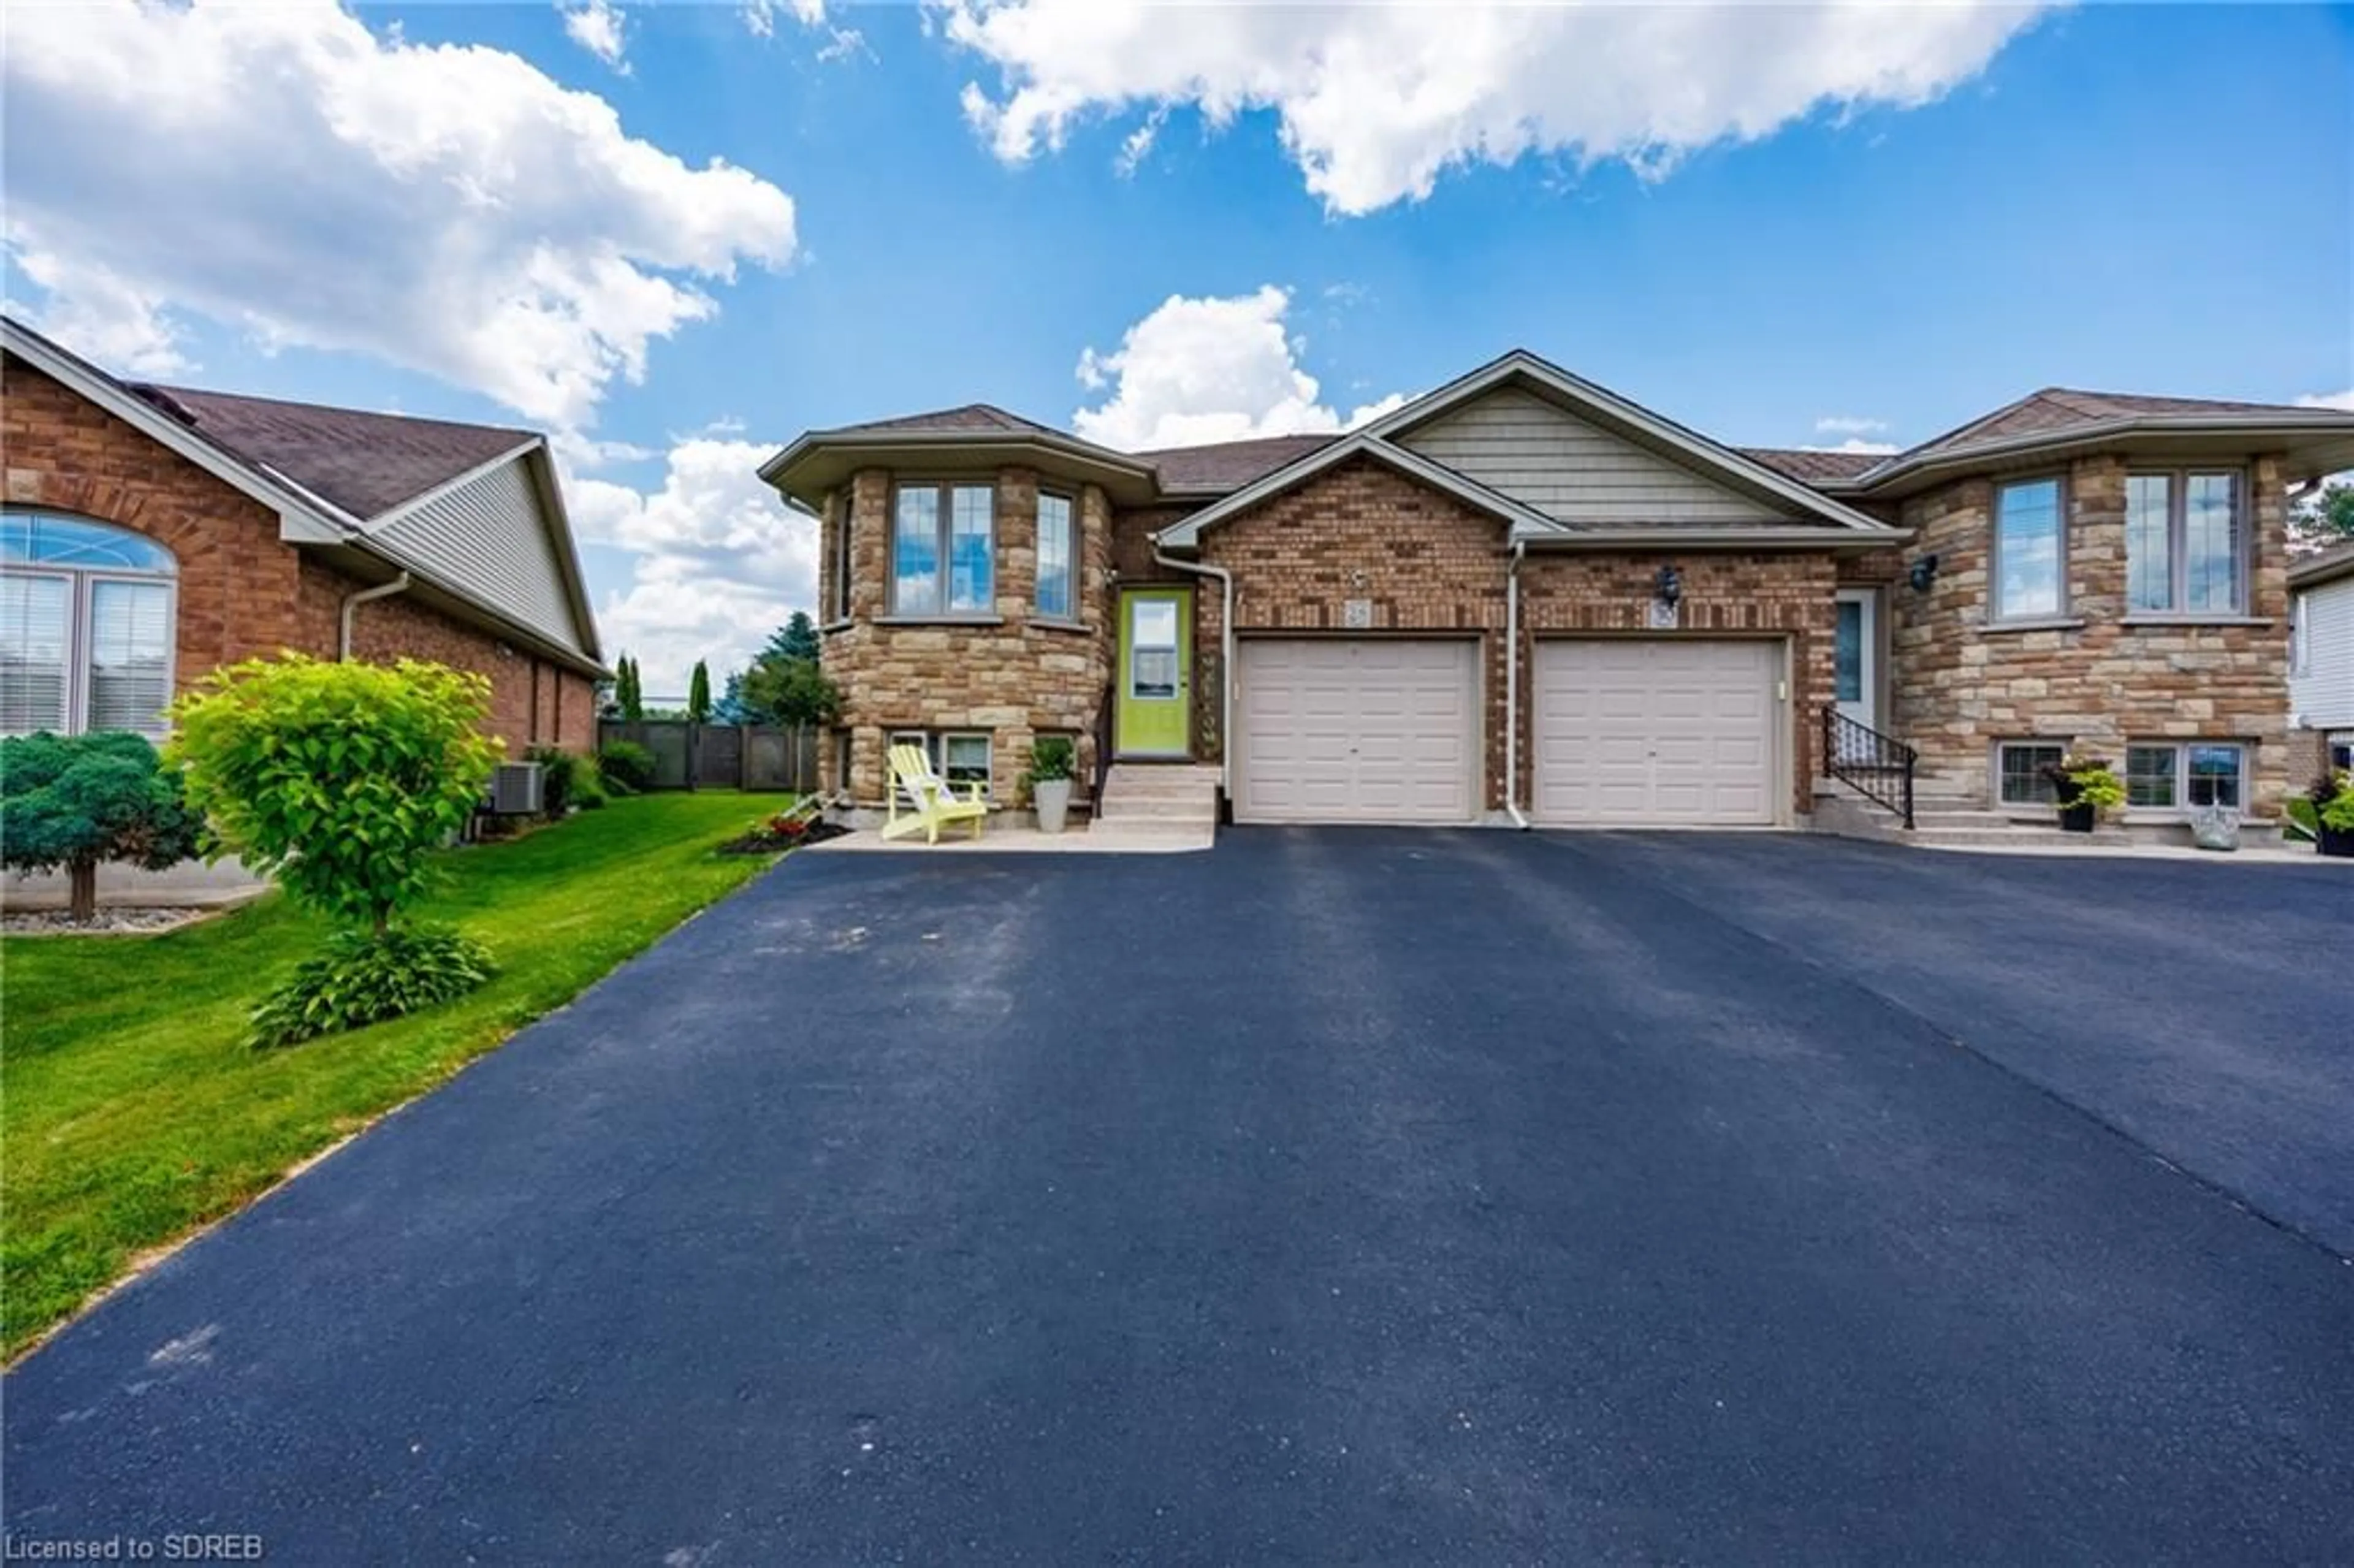 Frontside or backside of a home for 28 Millcroft Dr, Simcoe Ontario N3Y 0B1